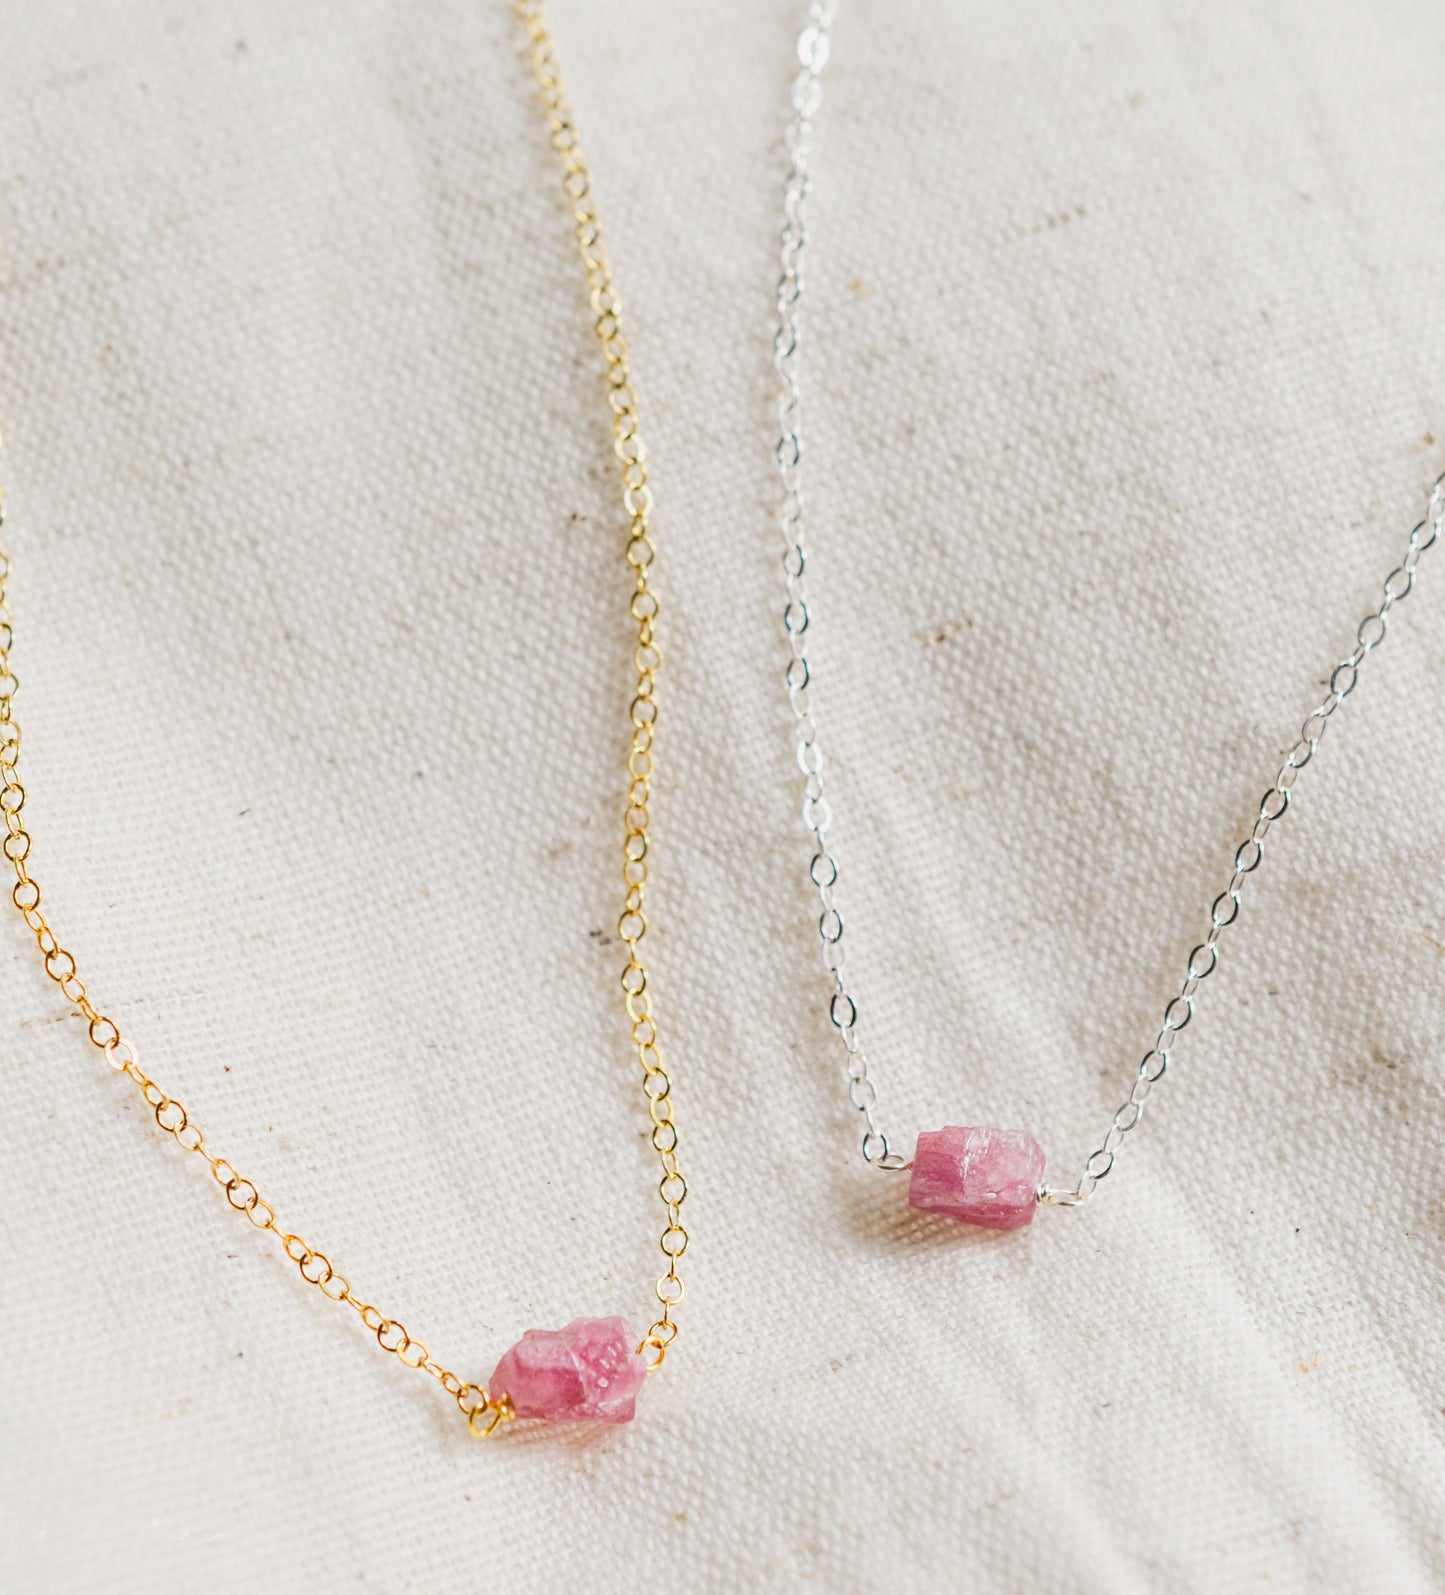 Minimalist rough pink Tourmaline crystal set on a 14k gold filled and a sterling silver chain. 